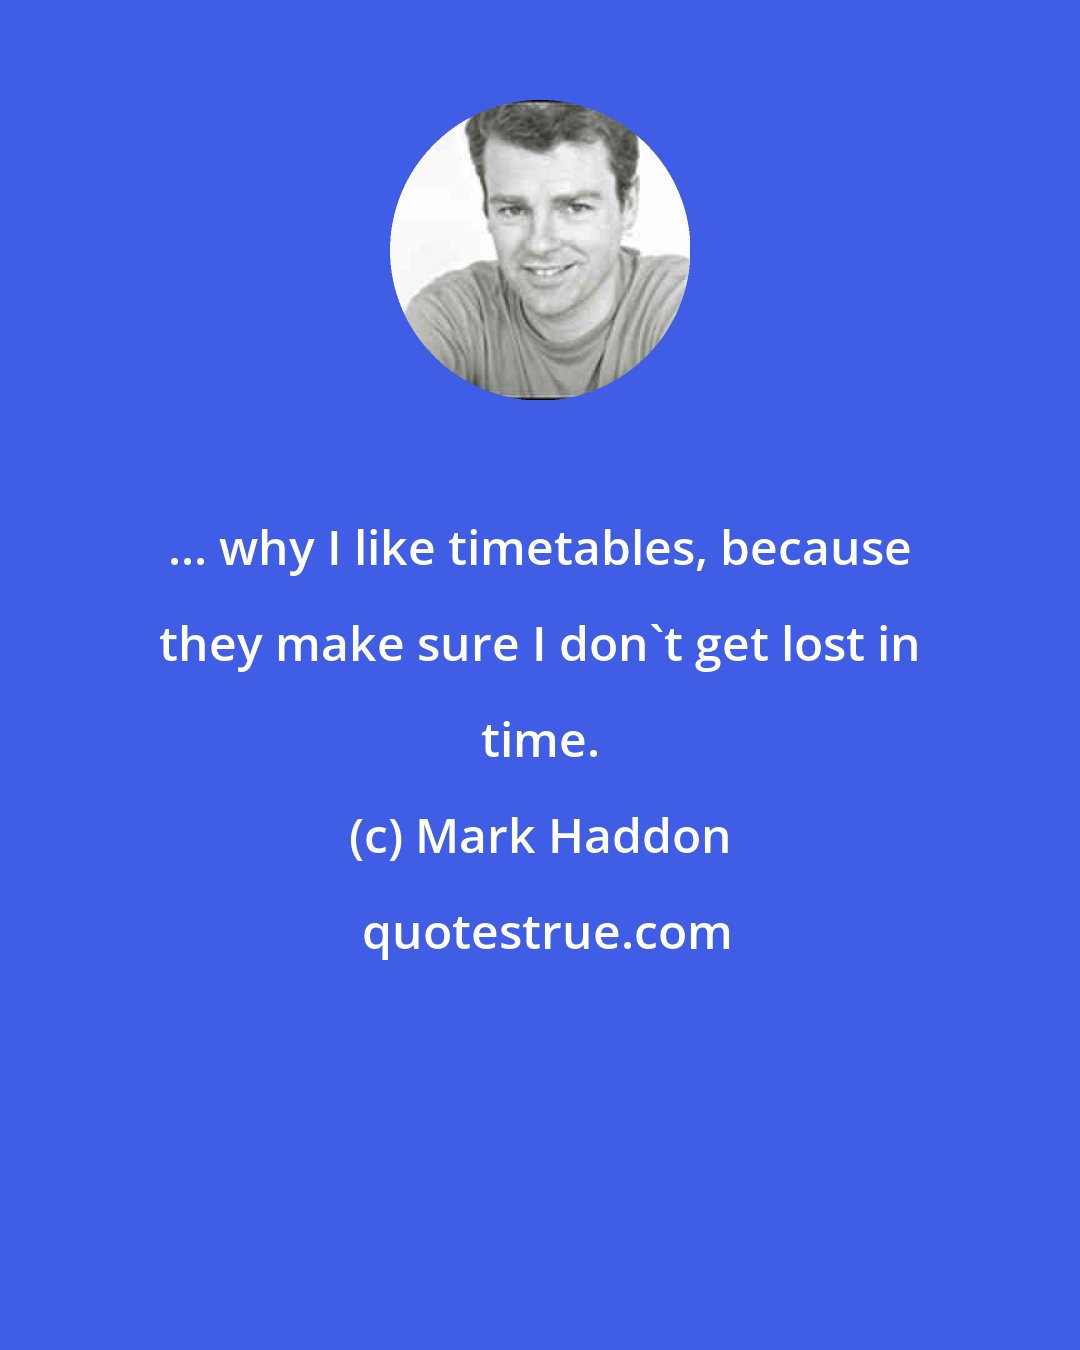 Mark Haddon: ... why I like timetables, because they make sure I don't get lost in time.